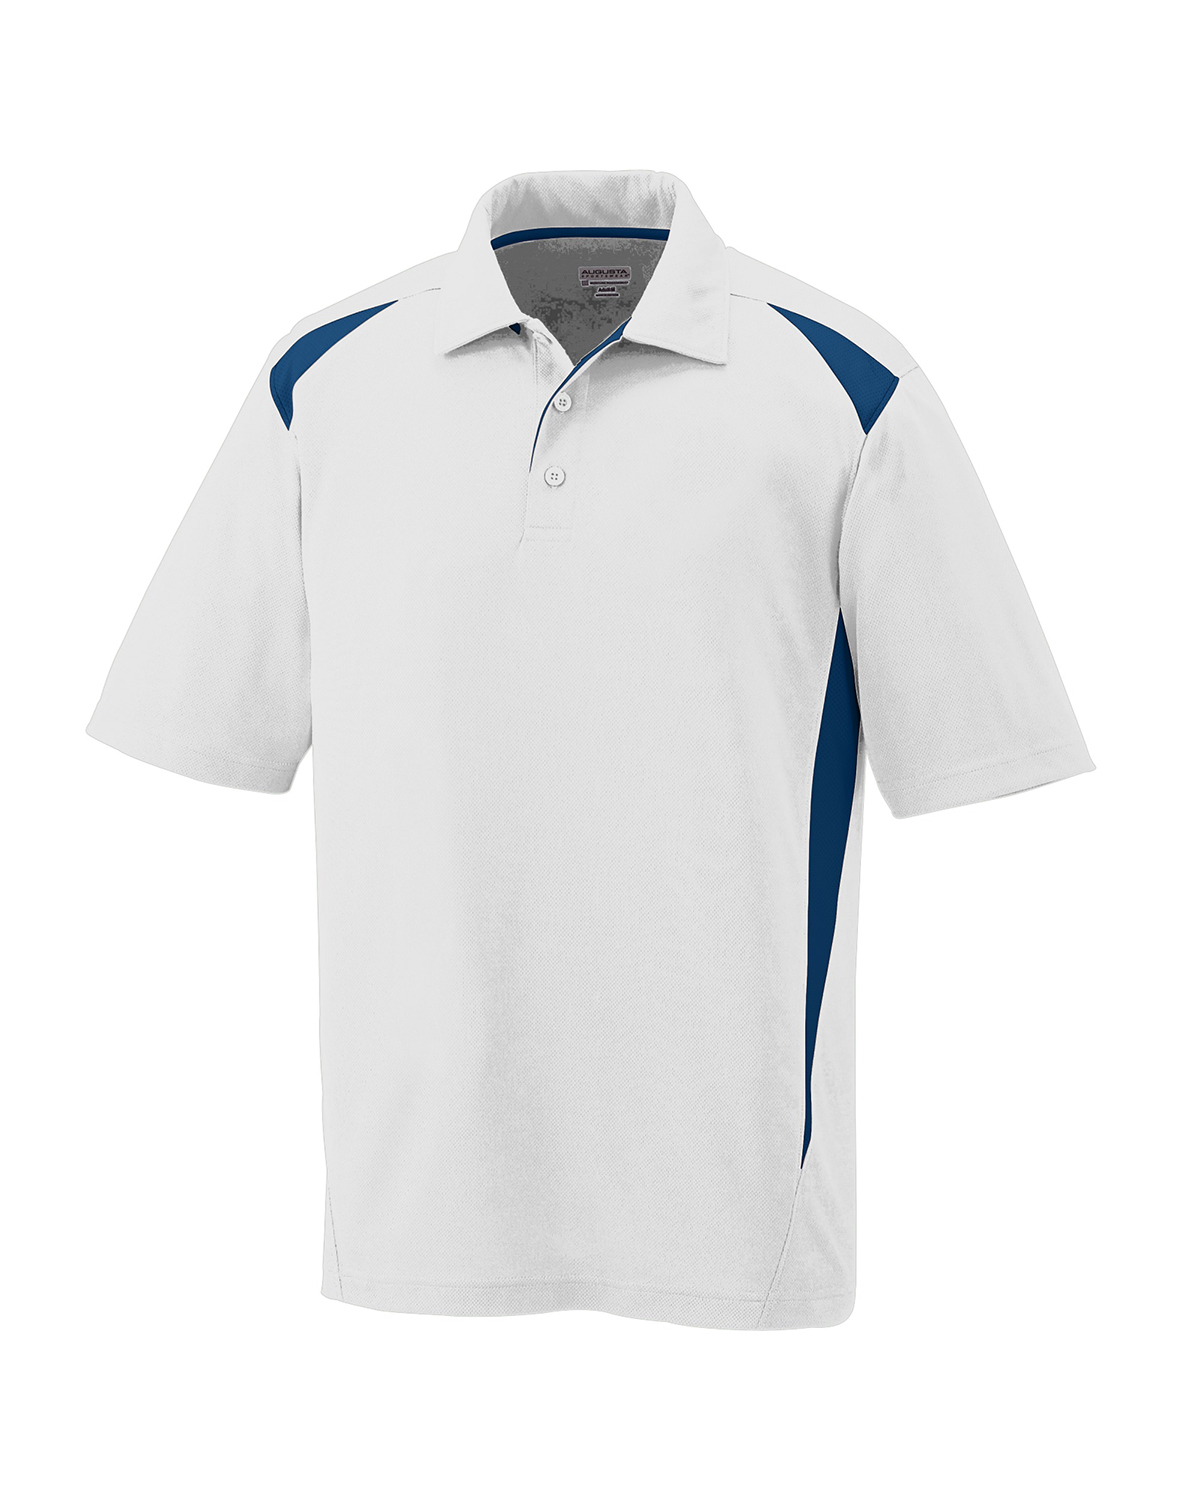 WHITE AND GREEN SMALL Premier Sport Shirt